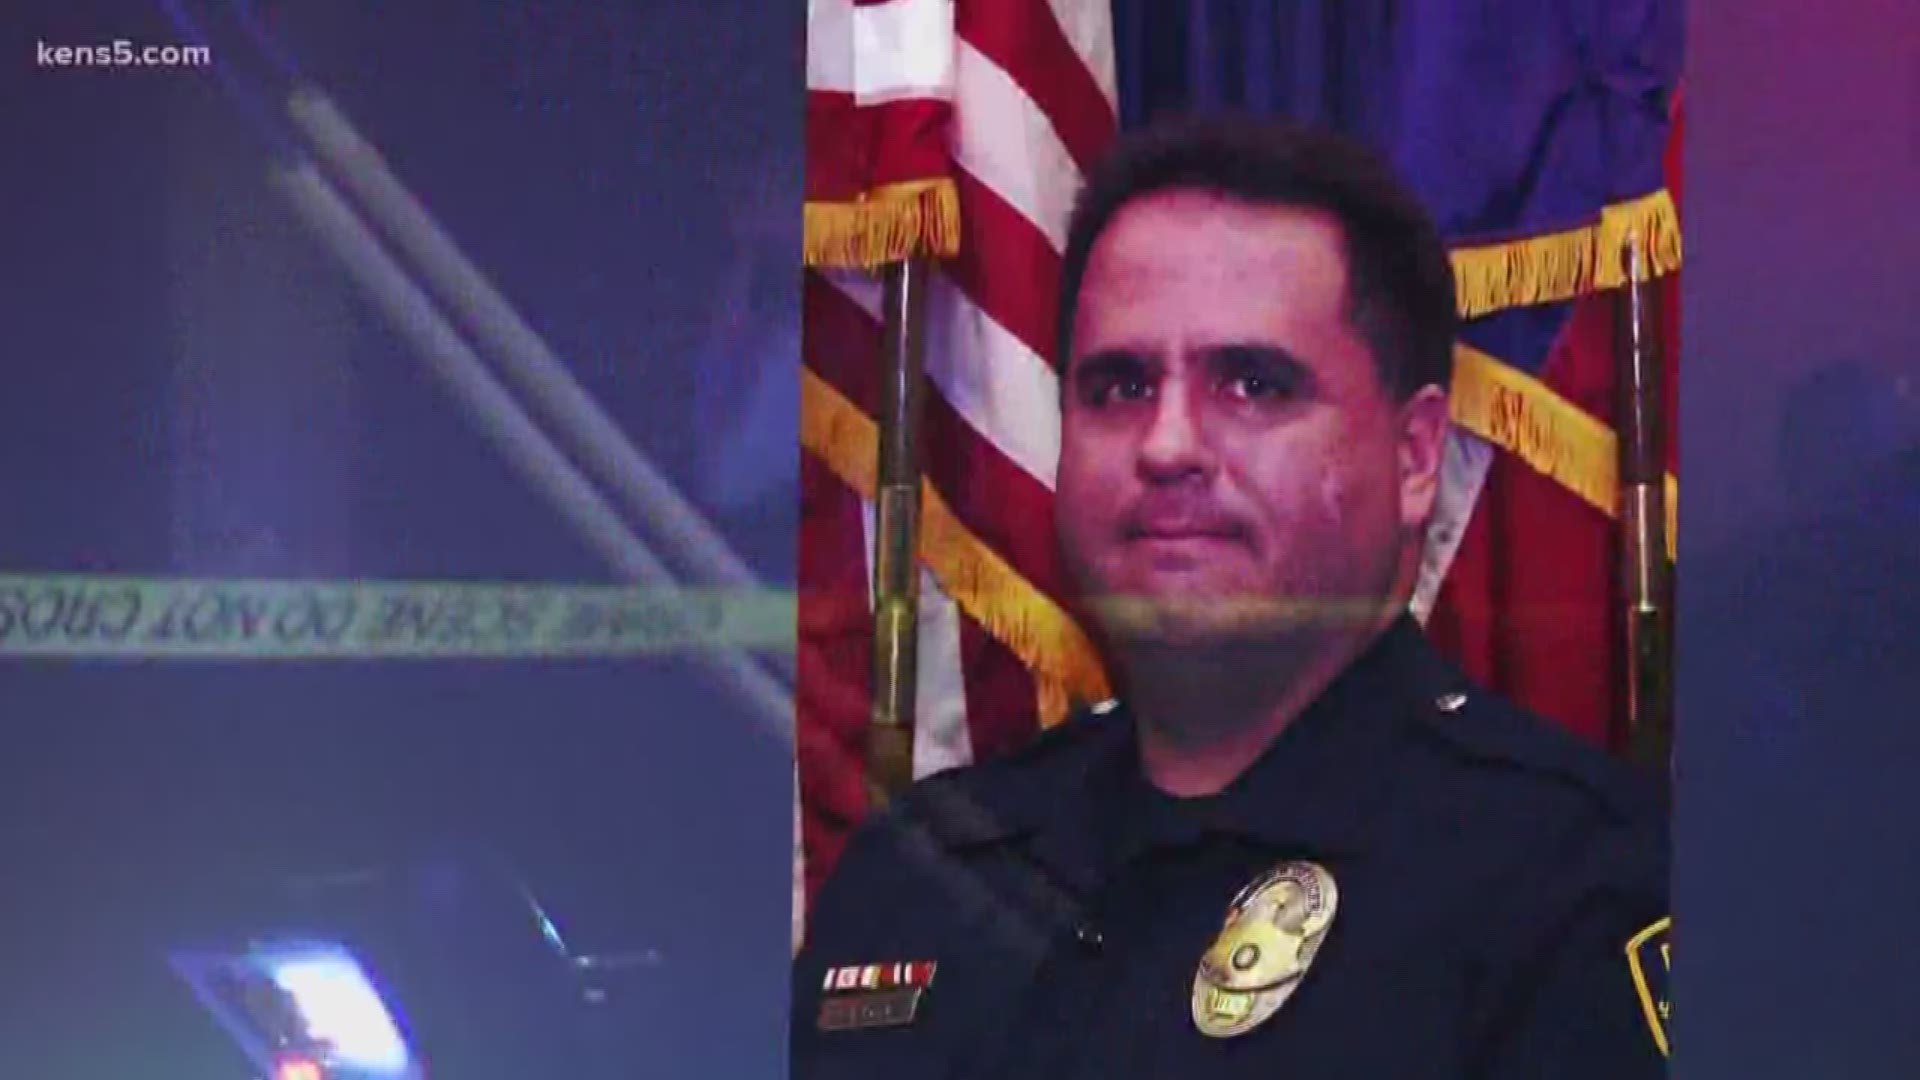 New details in the death of a San Antonio ISD officer who was working security and was killed.